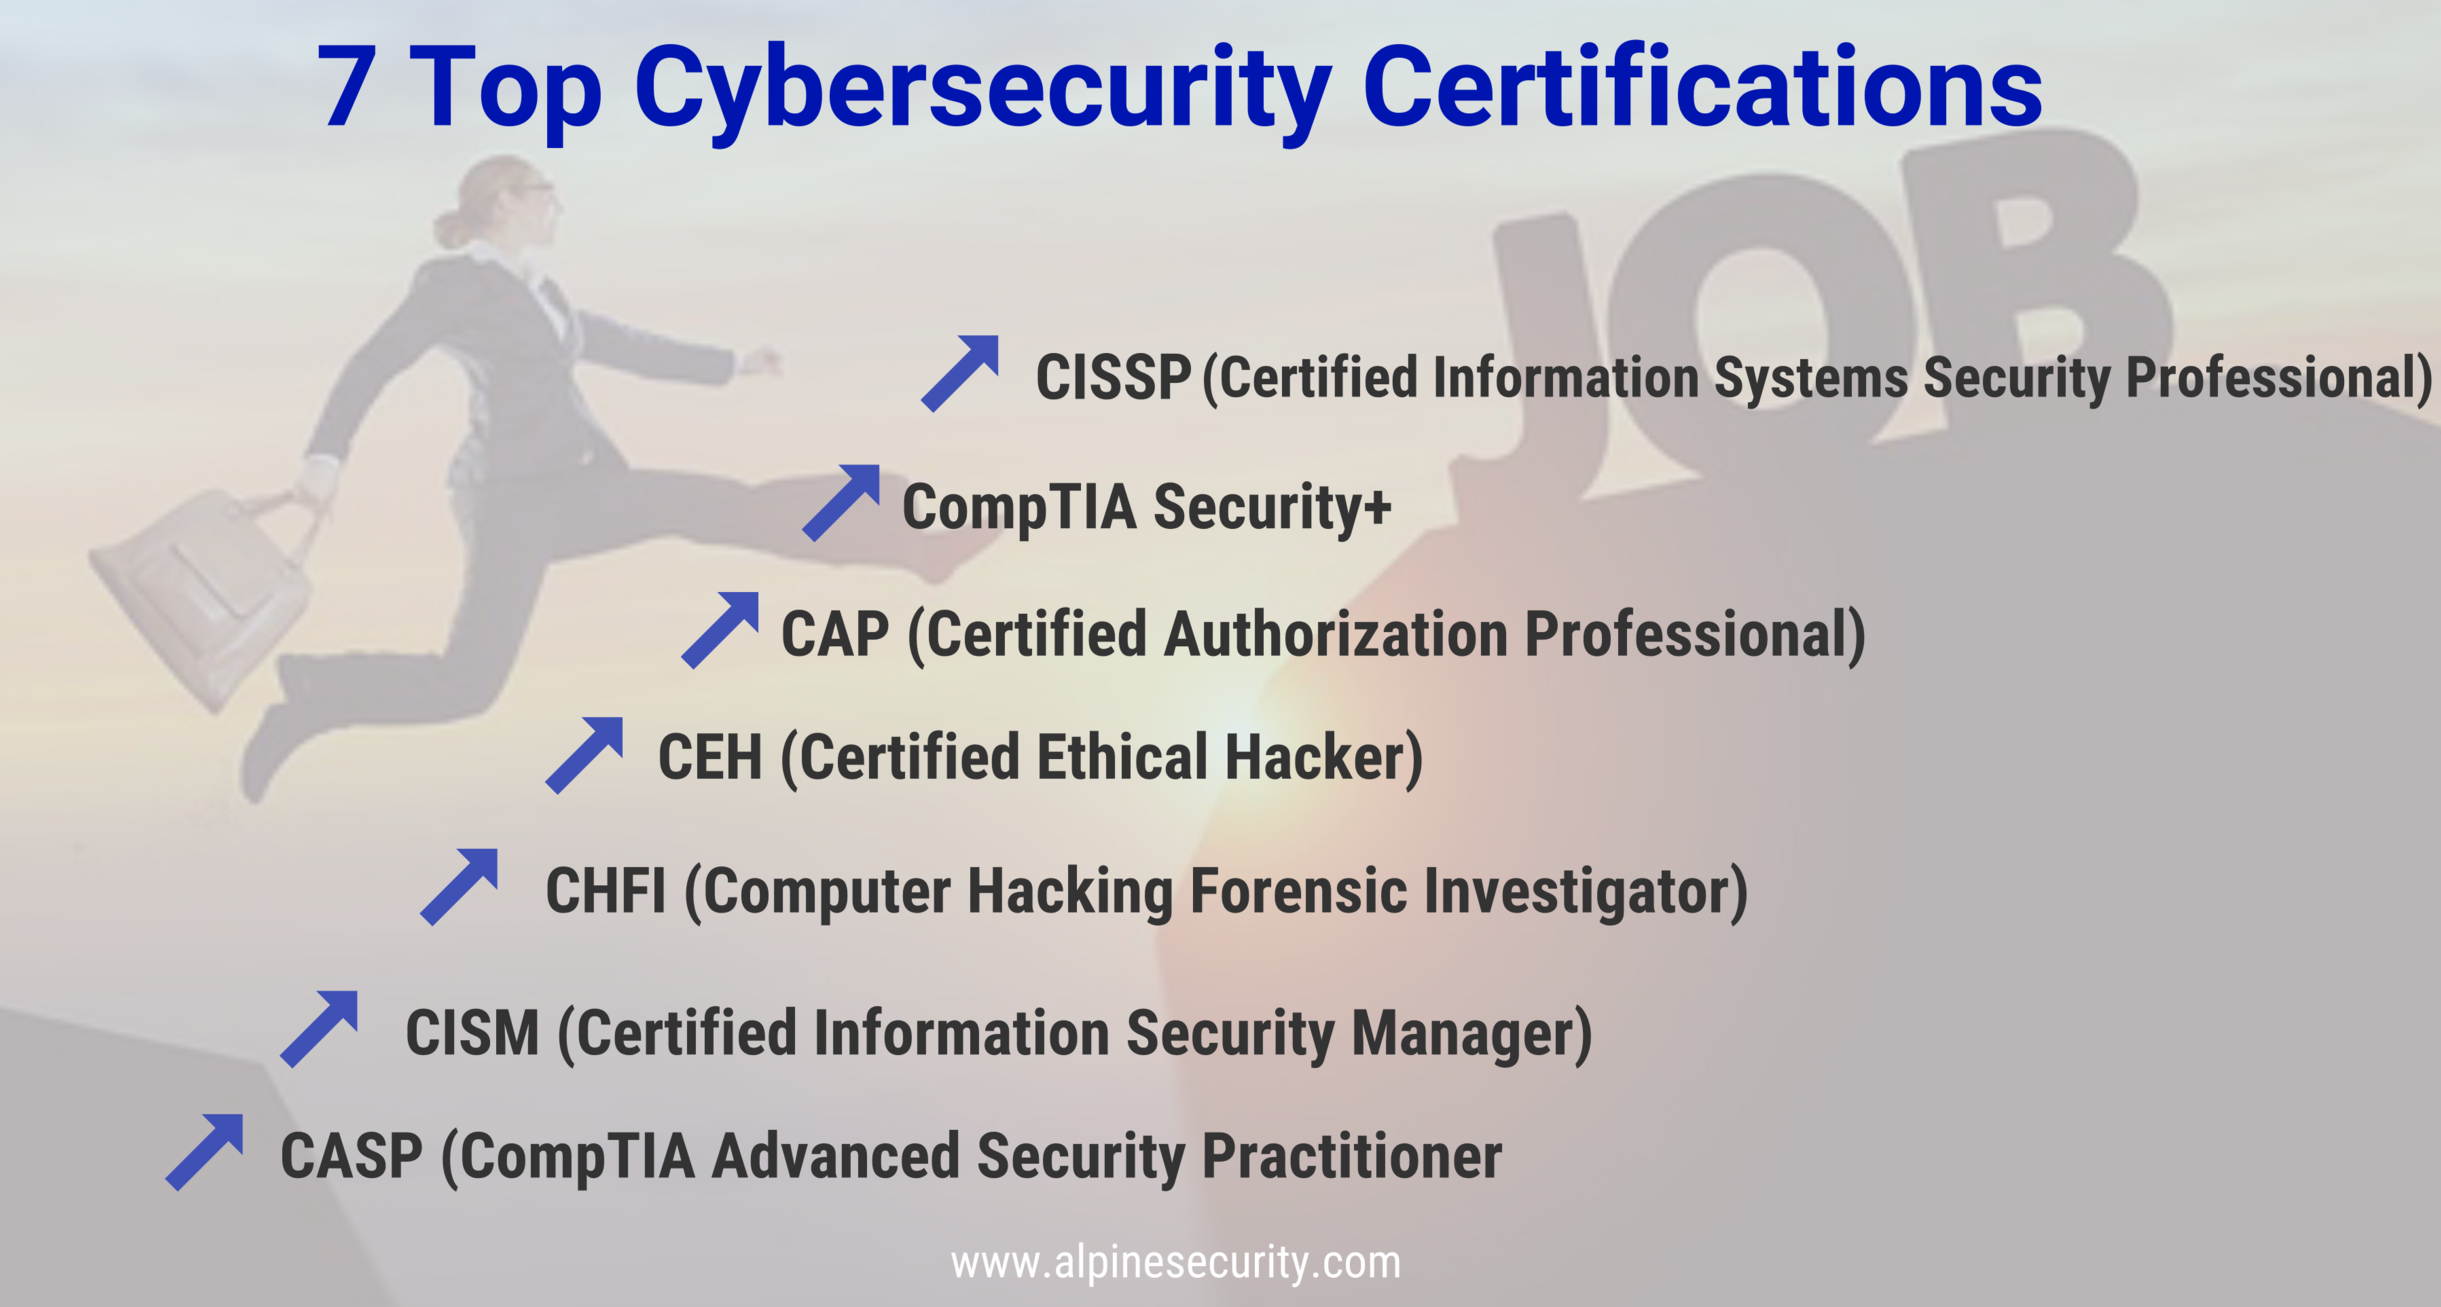 7TopCybersecurityCertifications 